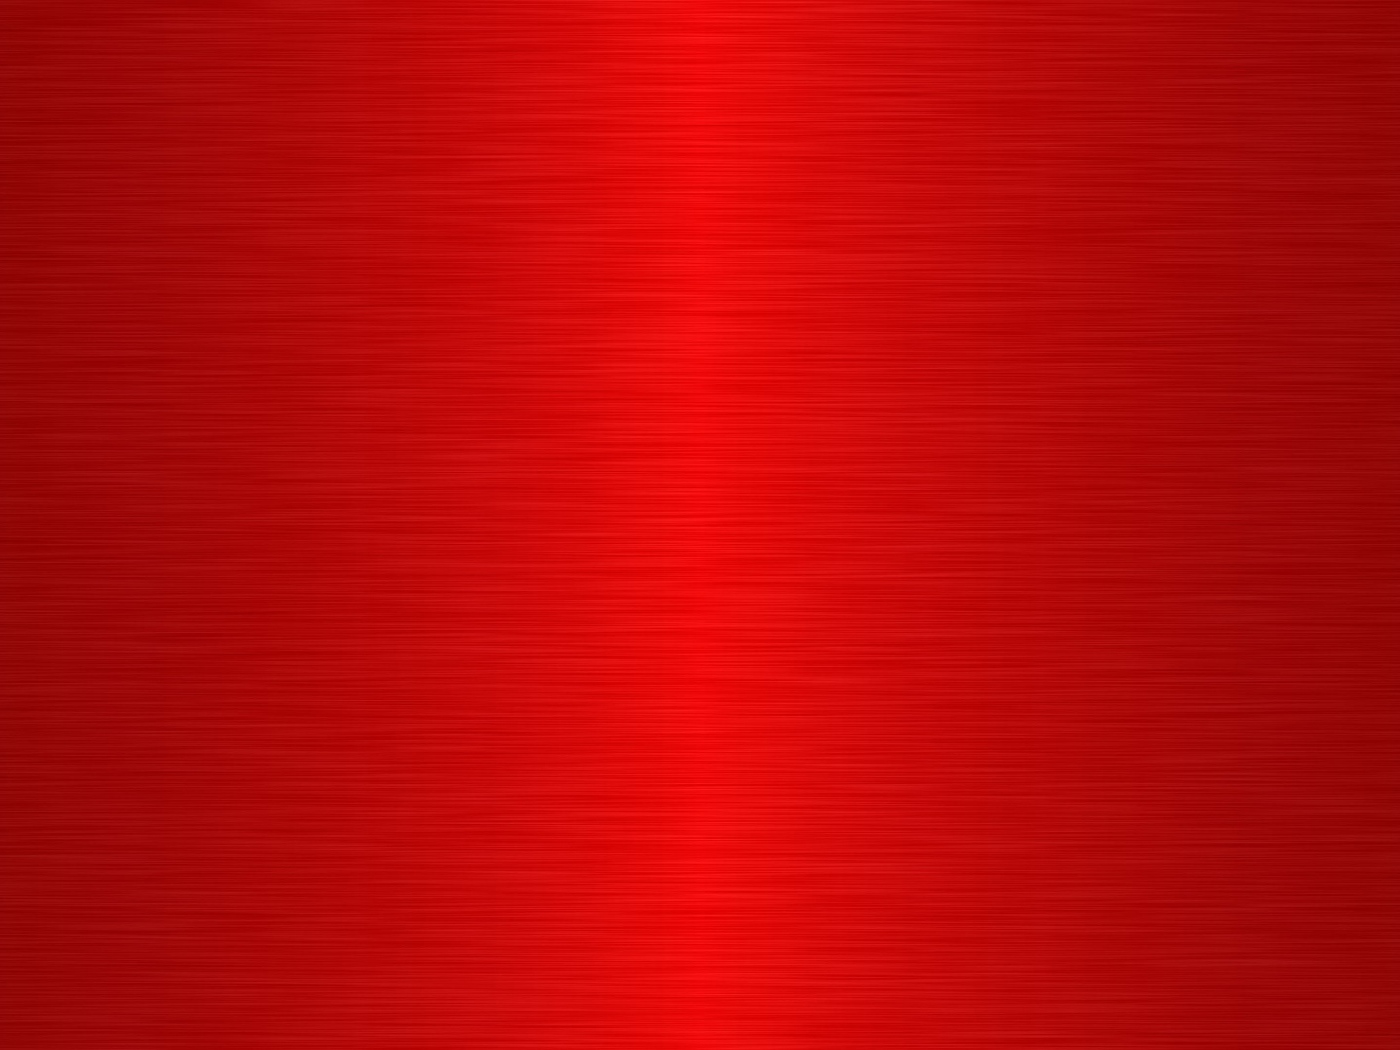 Bright red background, texture